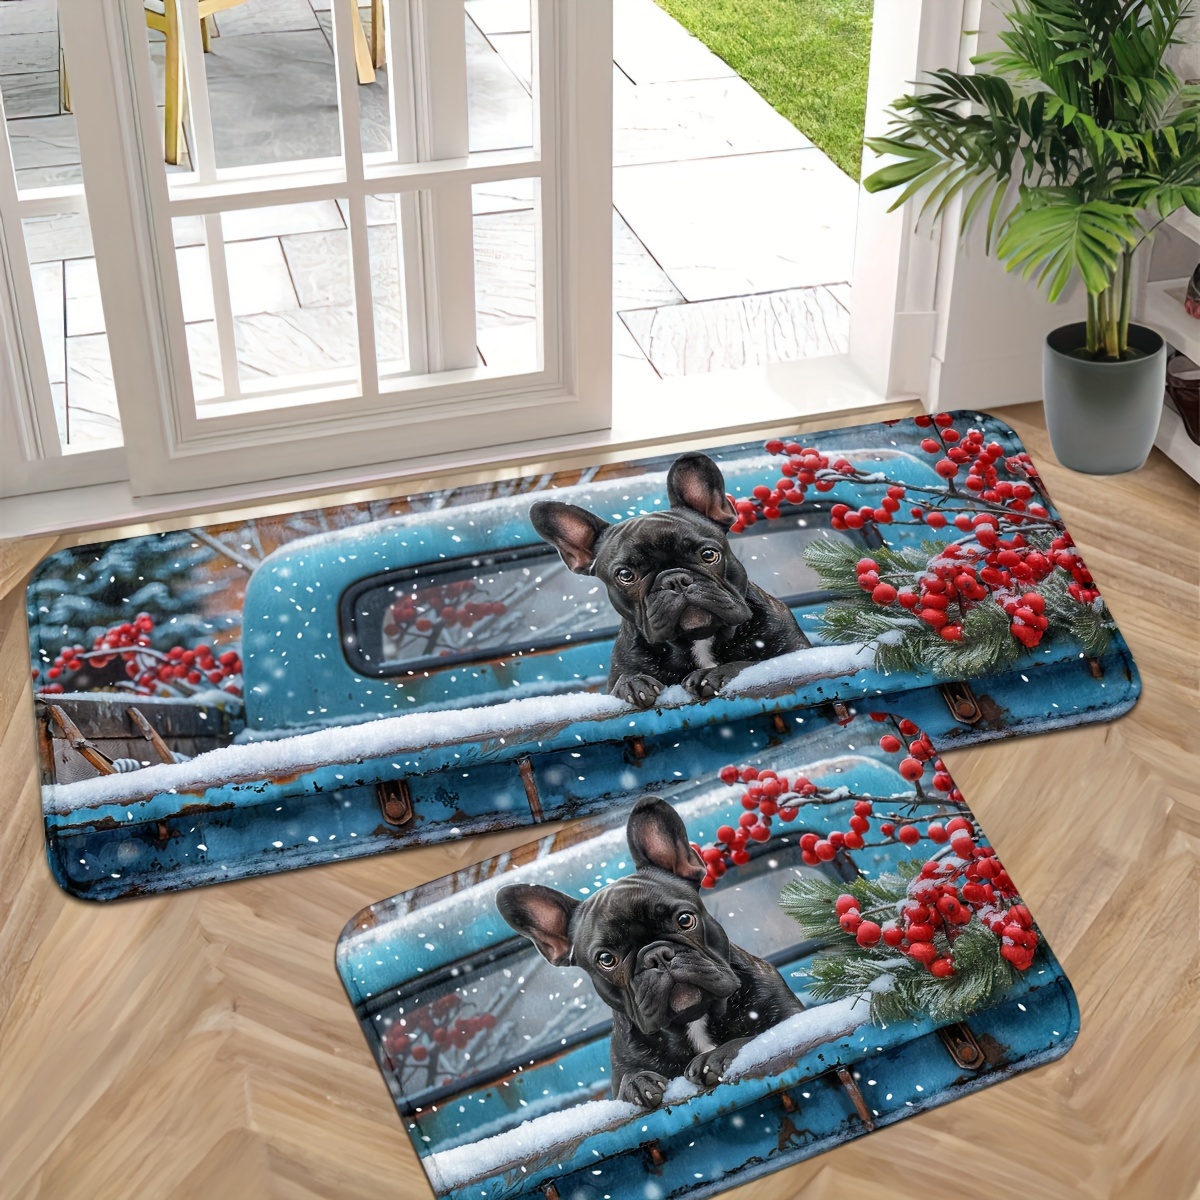 

French Bulldog Christmas Doormat Set - Non-slip Indoor Entrance Rug For Kitchen, Bathroom, Laundry Room - Washable Thick Carpet Runner For Outdoor Decor